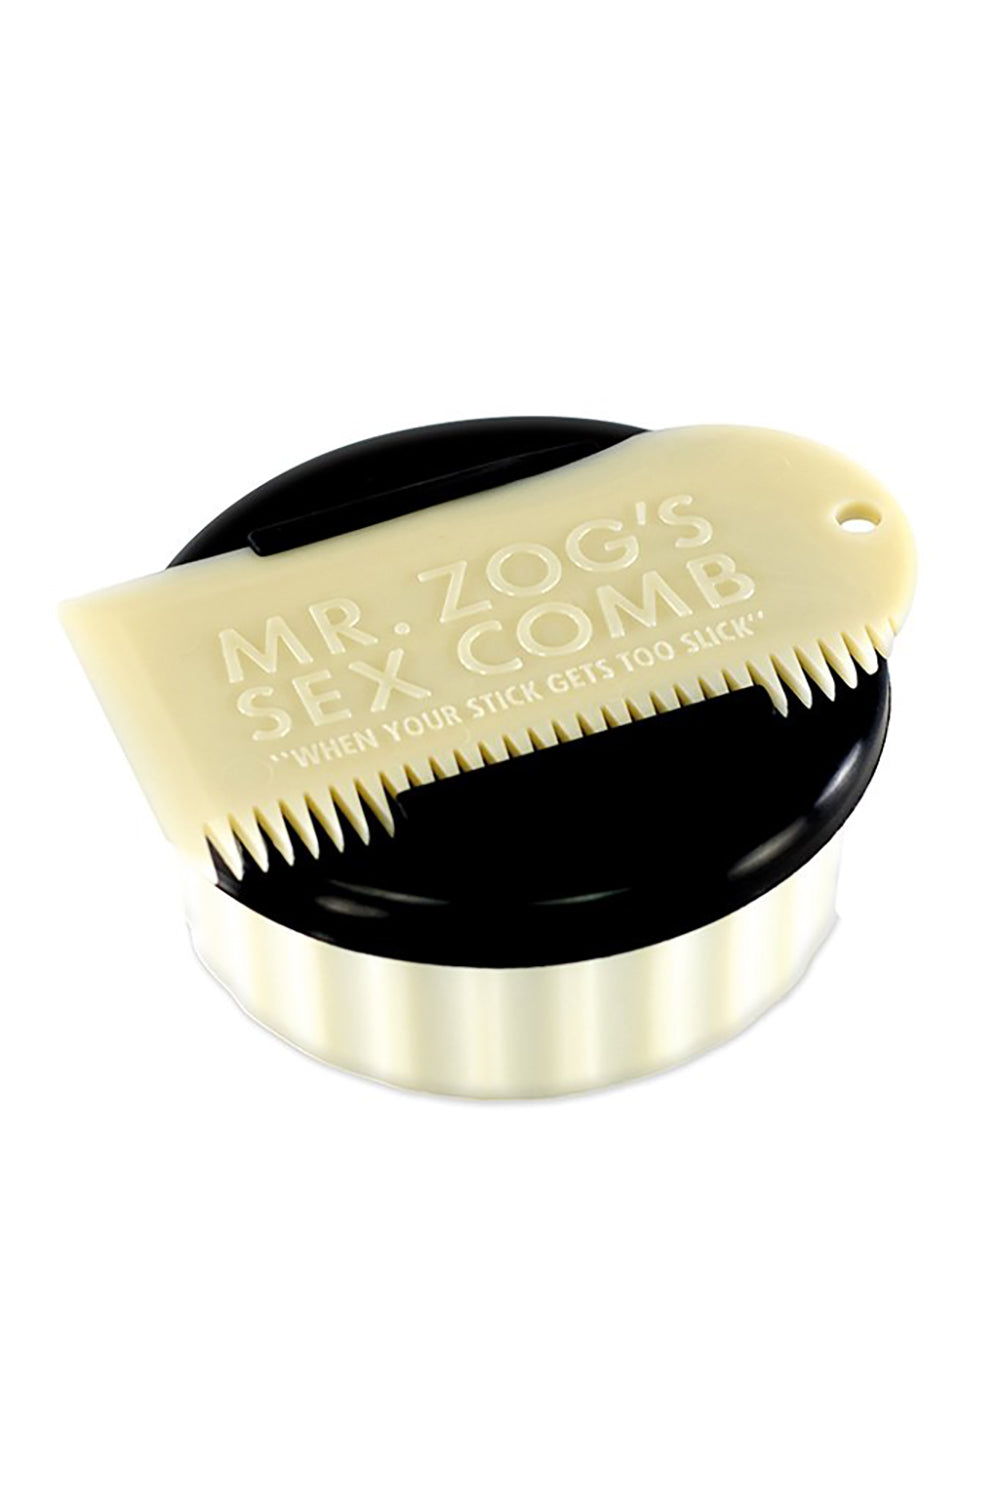 SexWax Container & Wax Comb